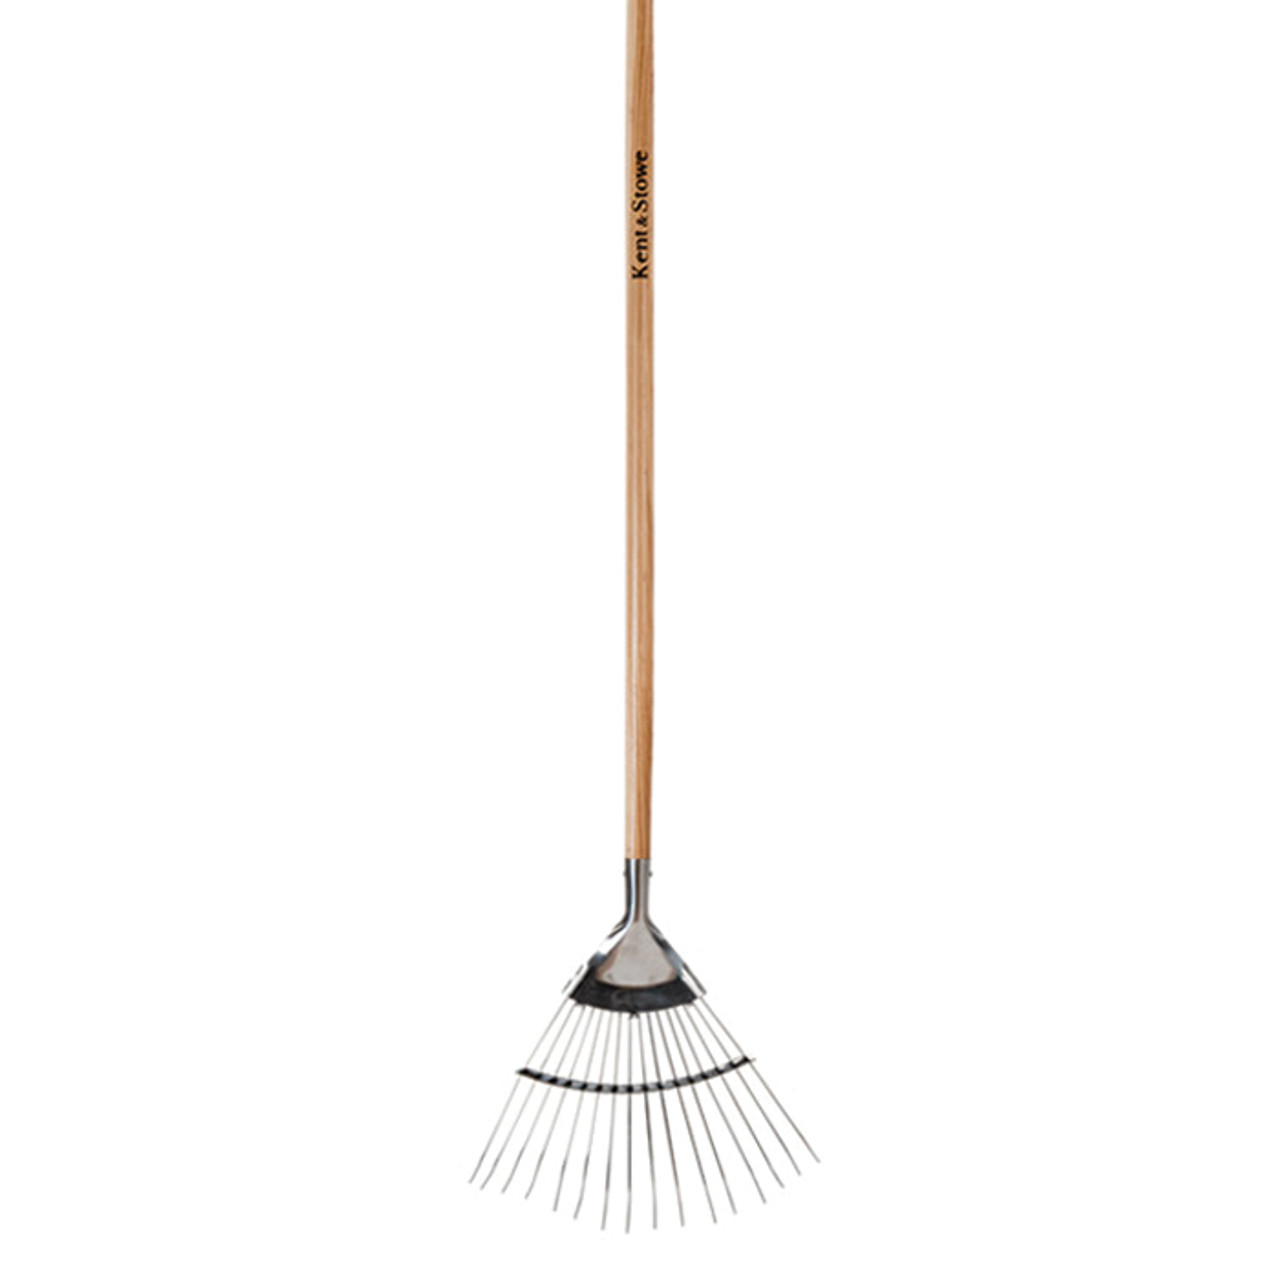 Garden Life Stainless Steel Lawn & Leaf Rake (*in-store only)